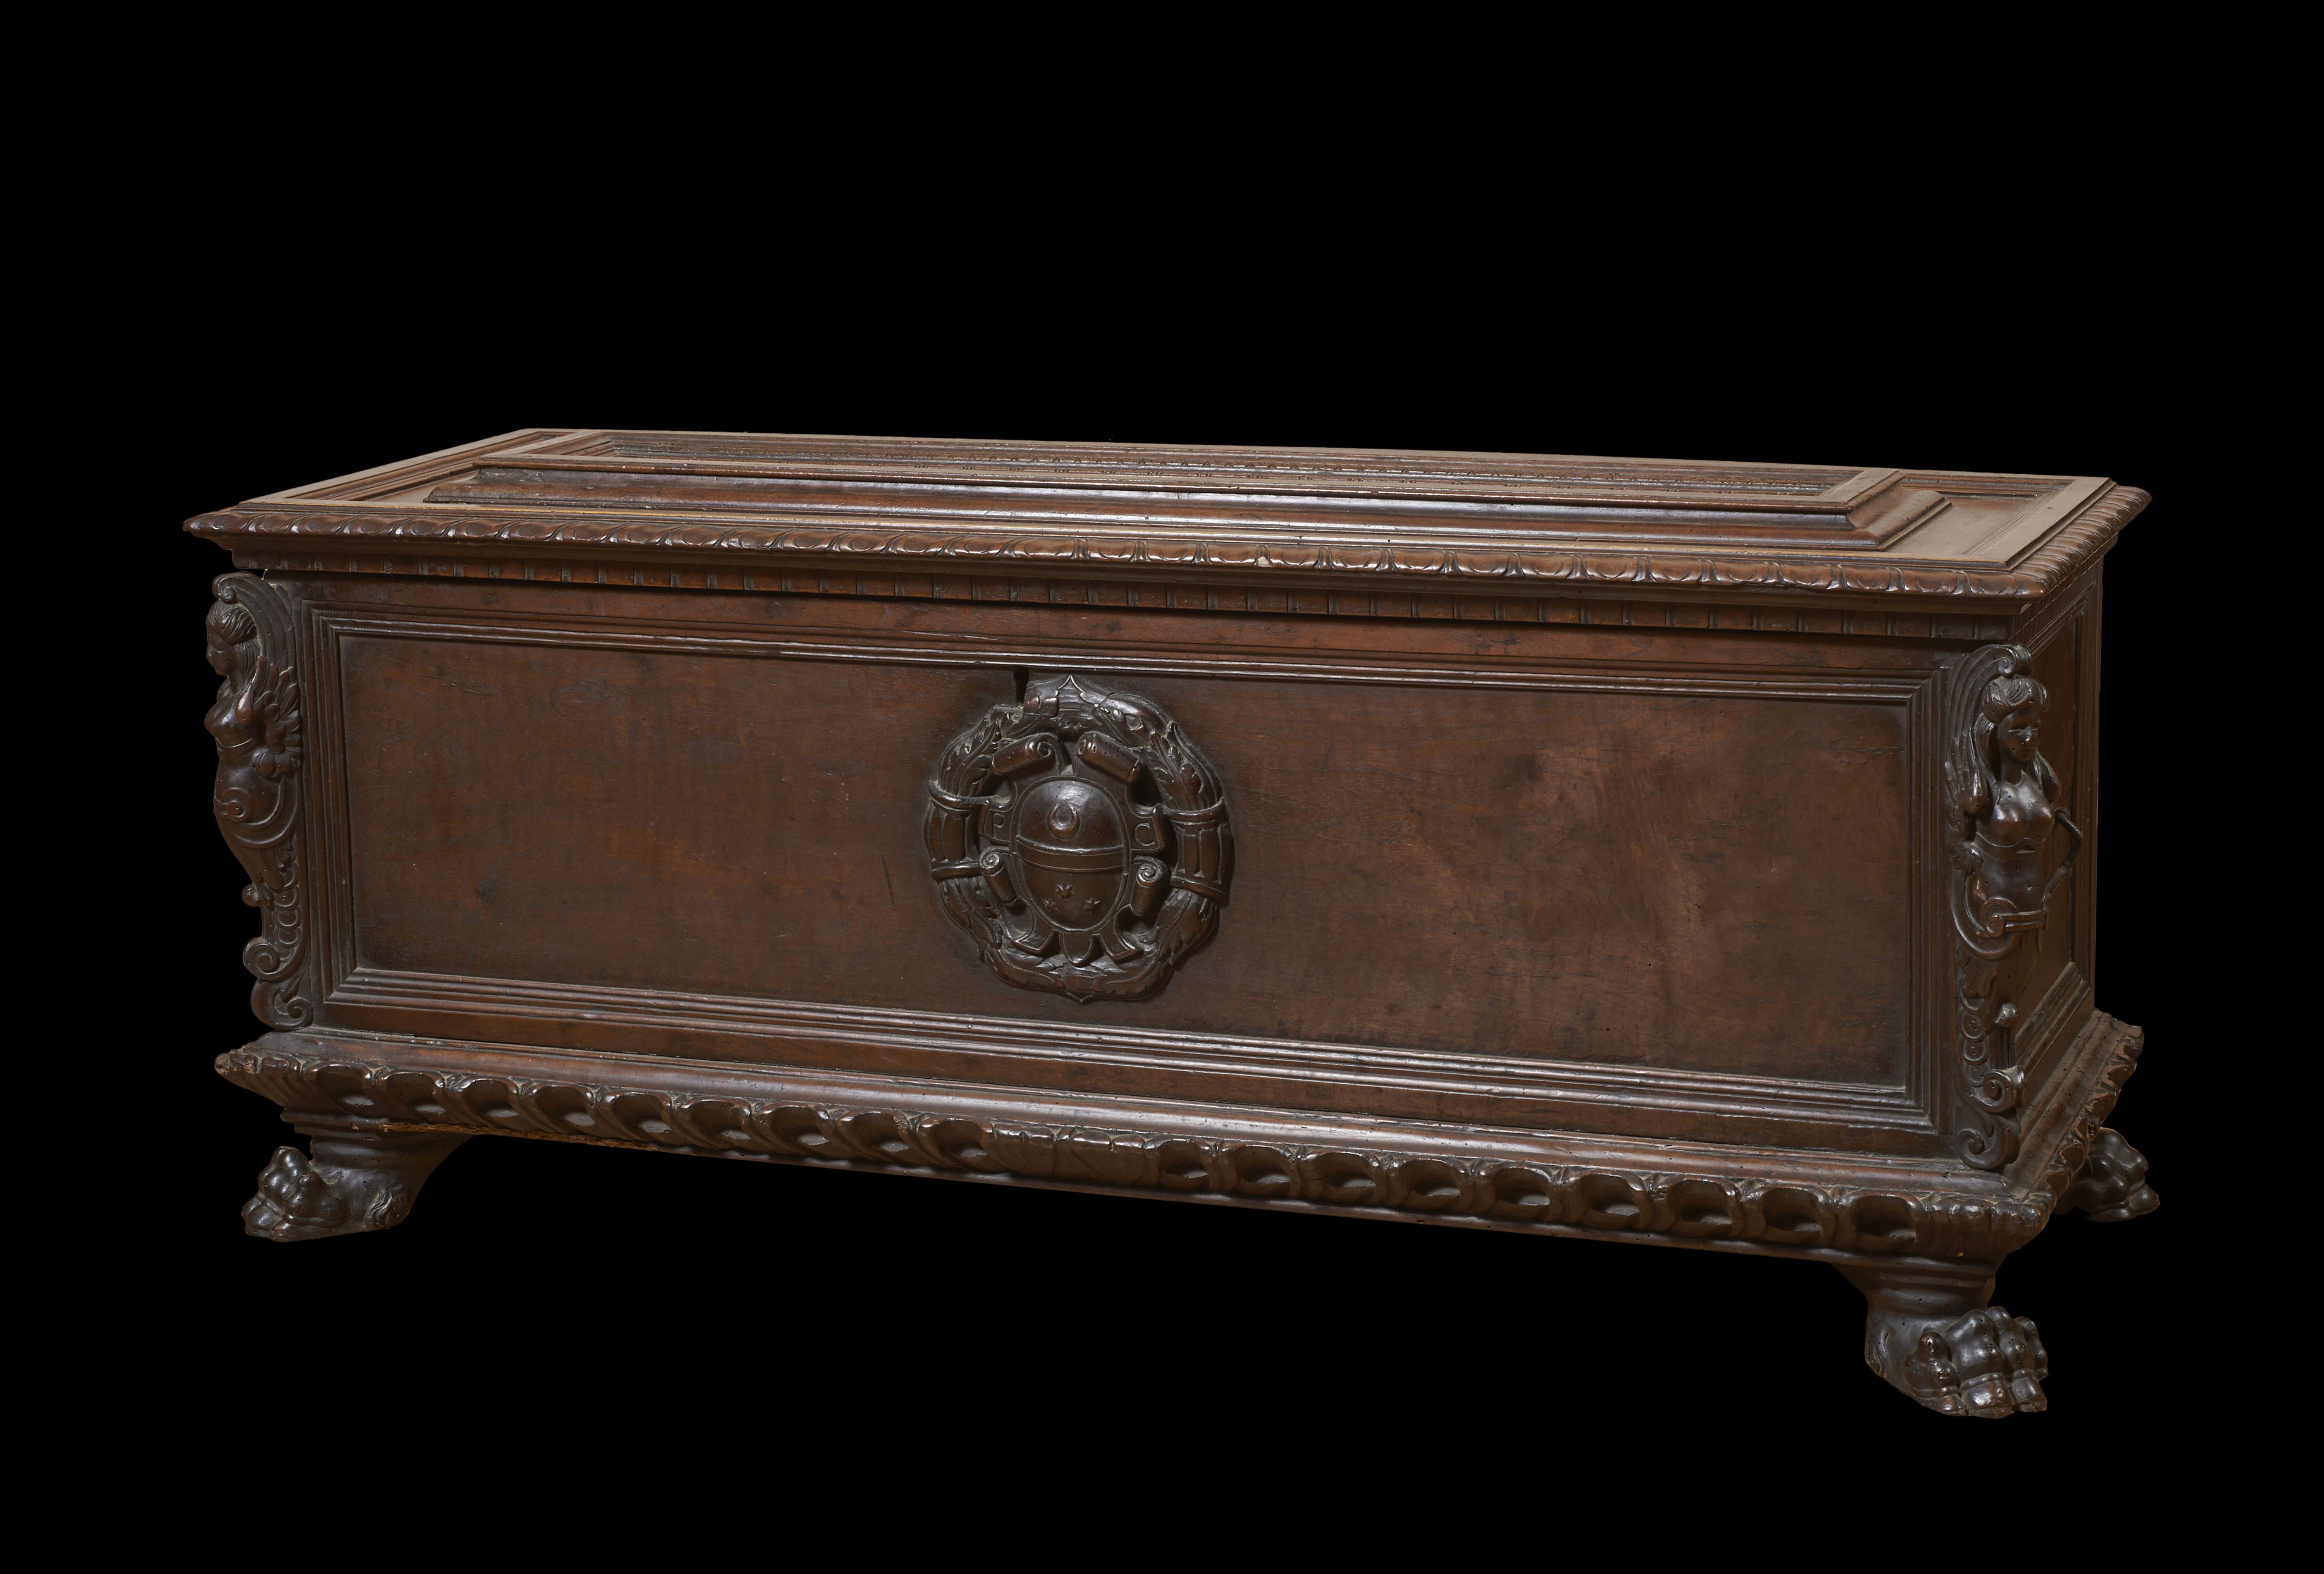 Lombard chest, Cremona, in walnut measuring 60 x 150 x 53 cm from the second half of the seventeenth century.

This rich walnut chest was built in the seventeenth century in the Lombard area.

On the heavy front feet, sculpted like a lion's paw,